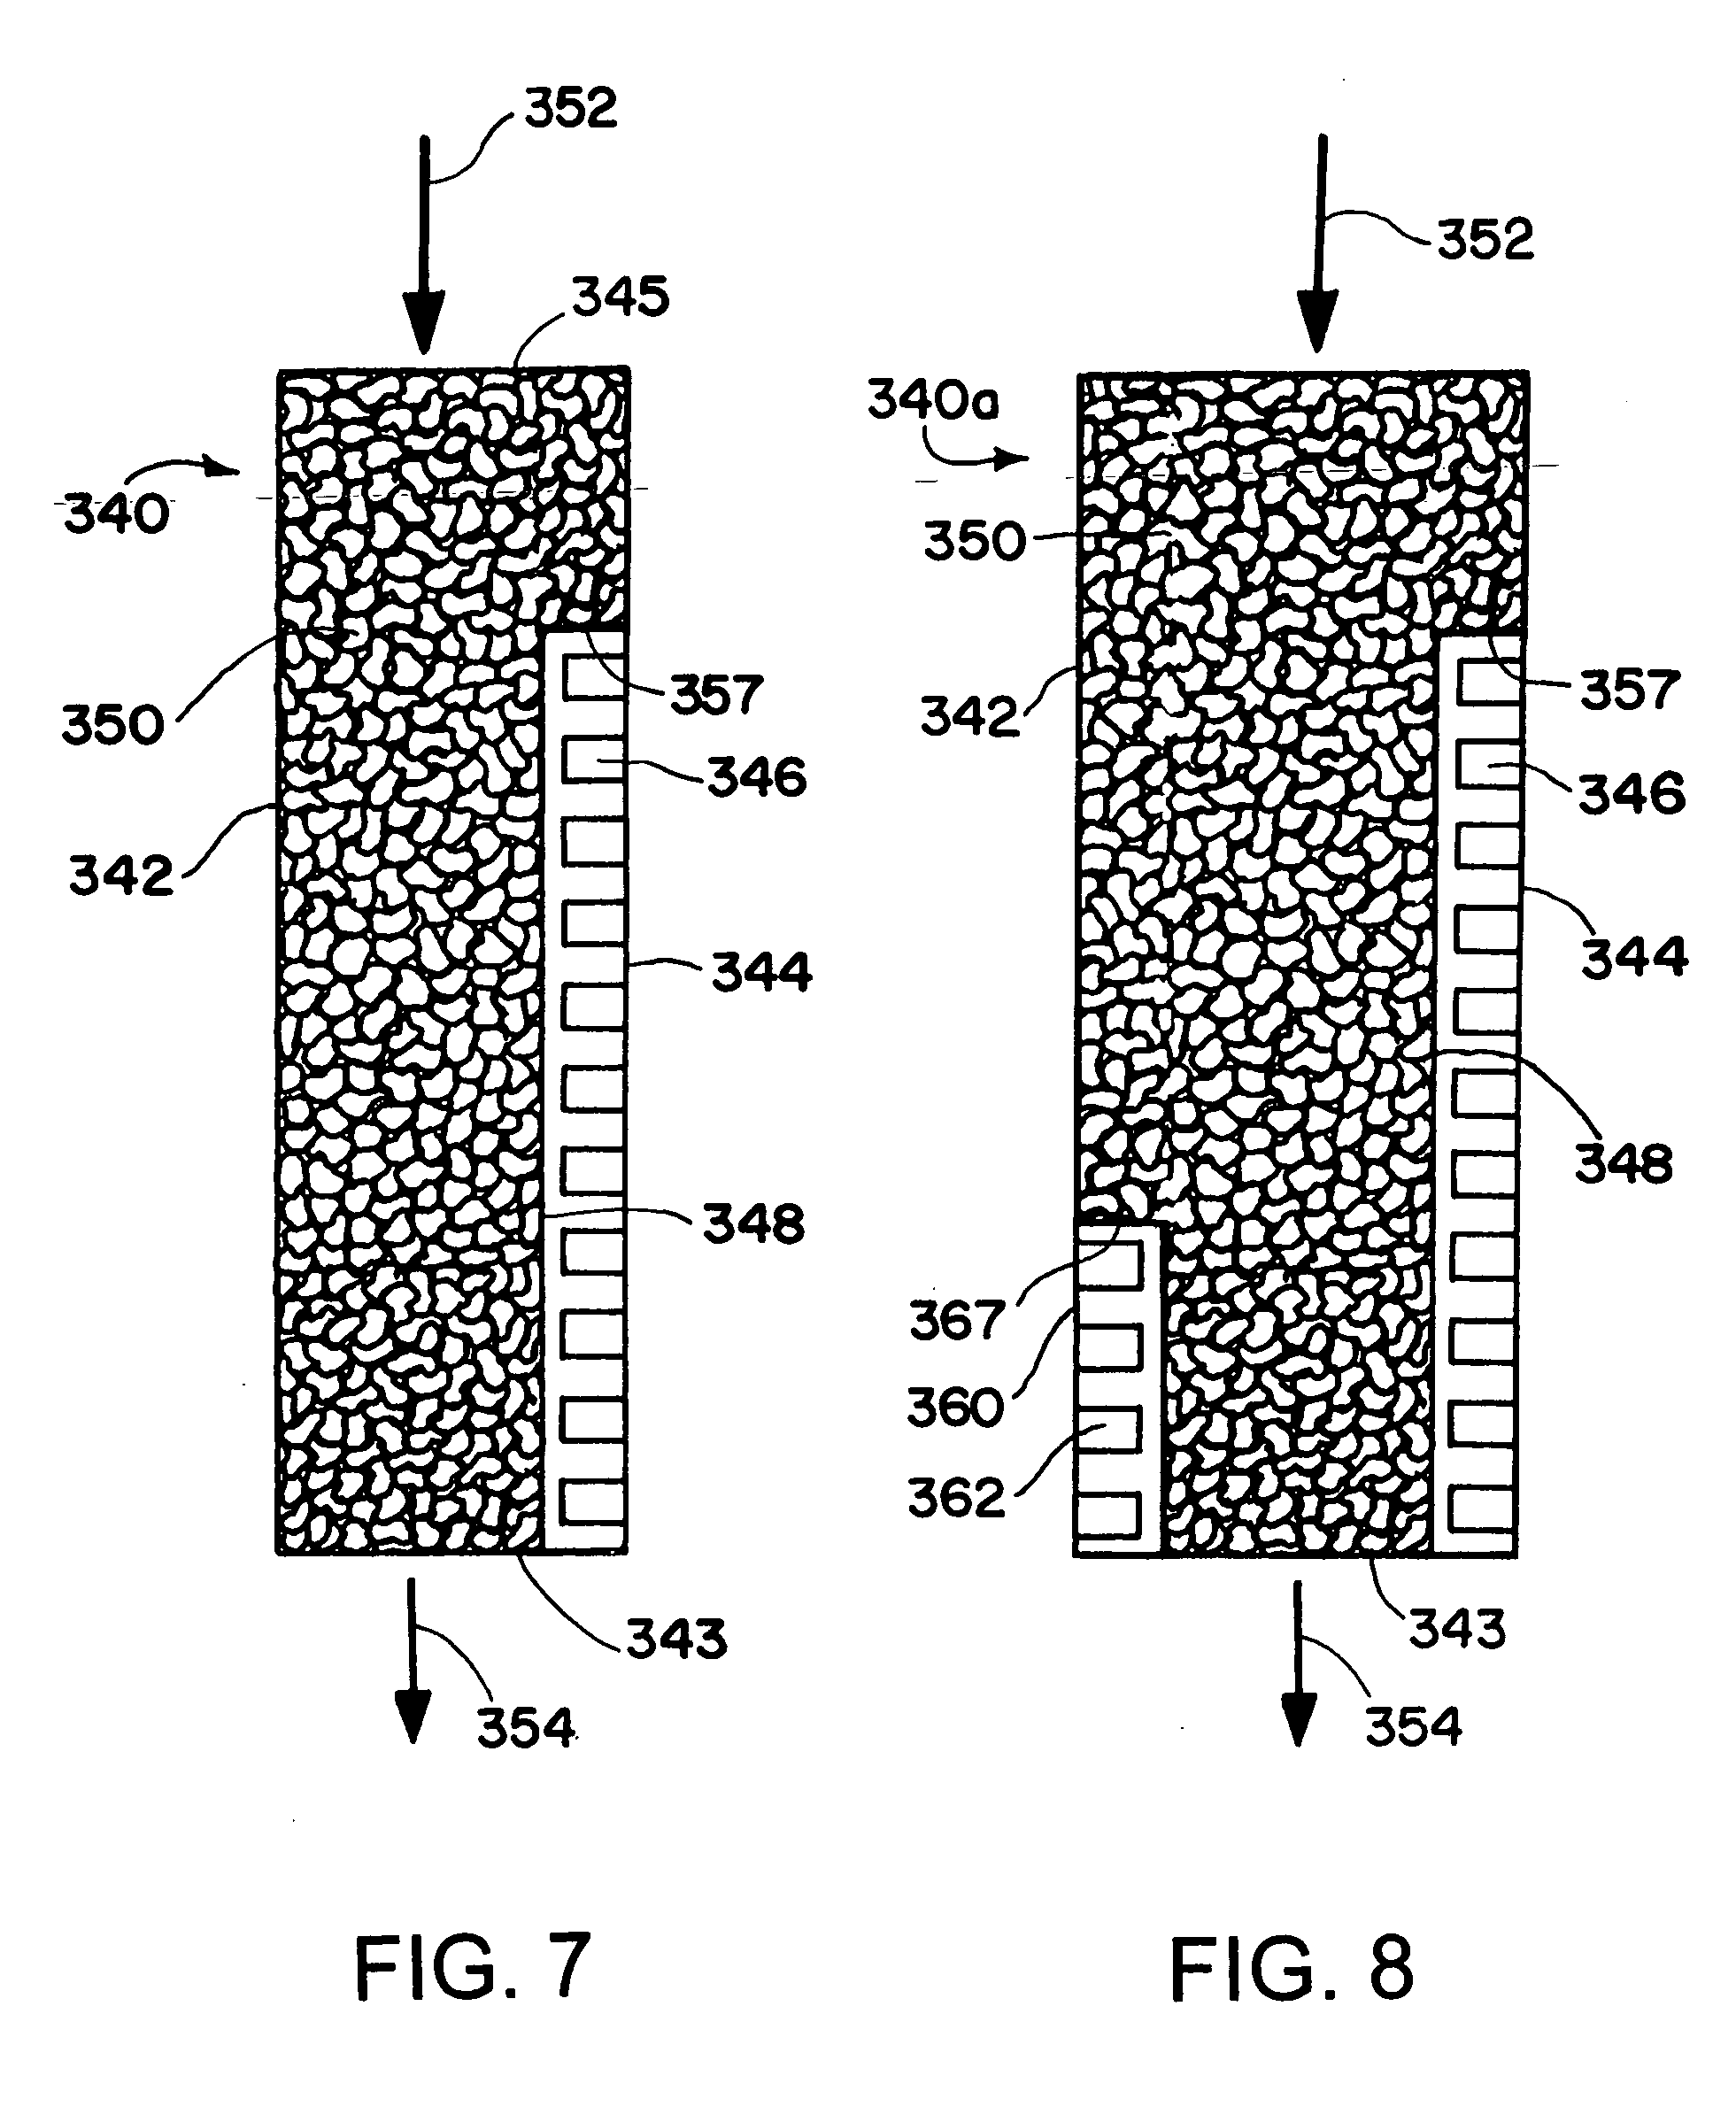 Process for conducting an equilibrium limited chemical reaction using microchannel technology